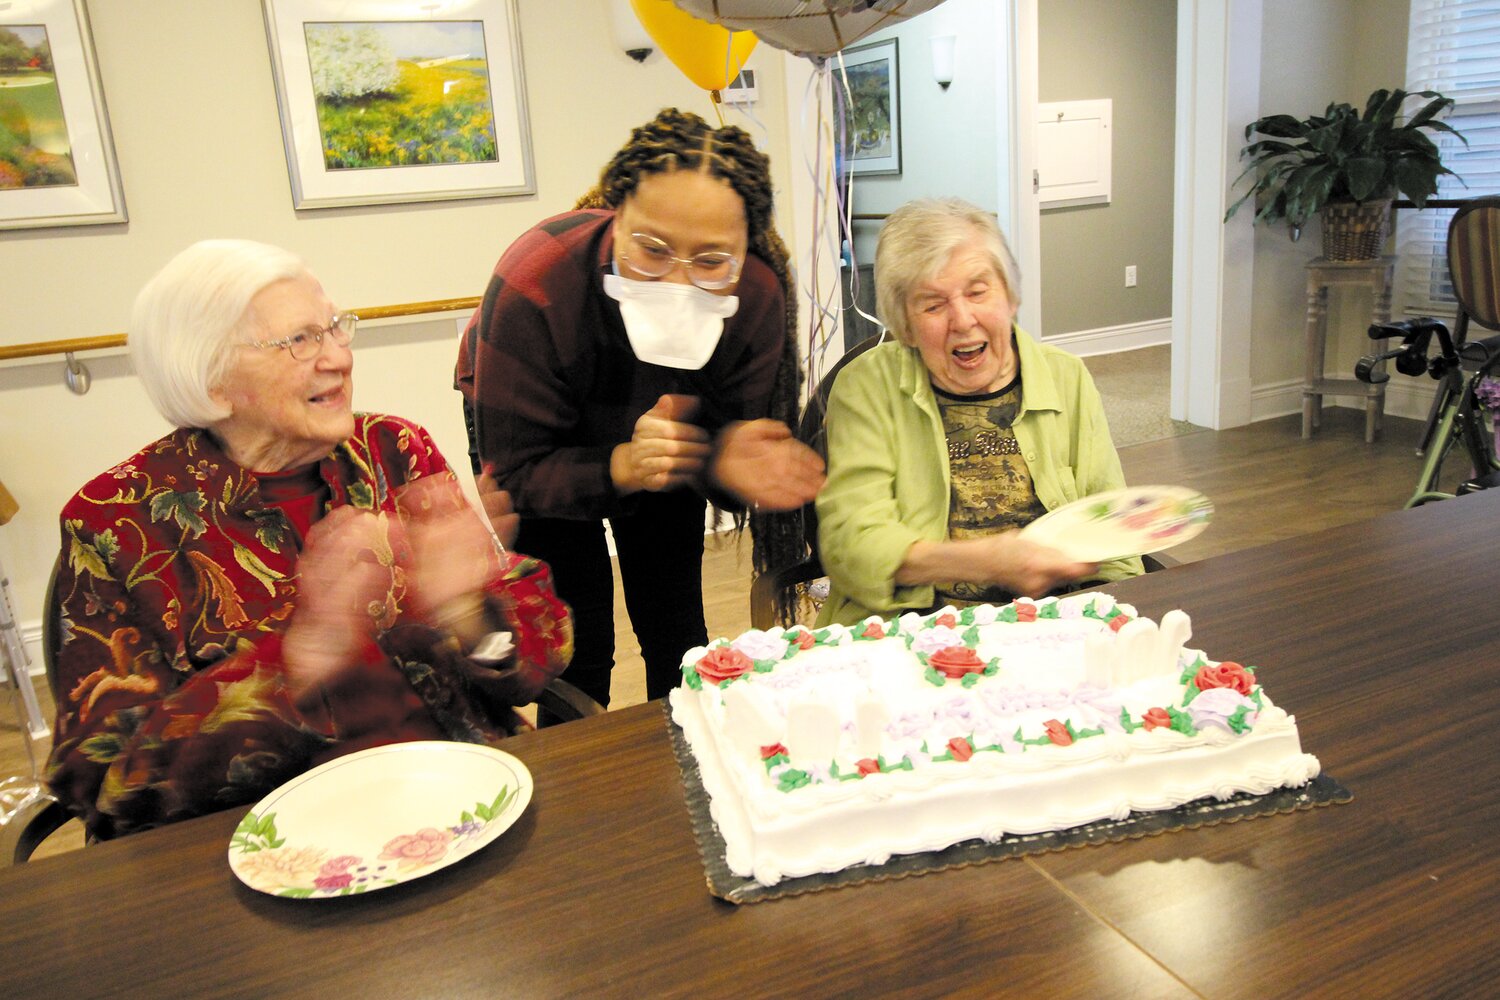 SAVING THEIR BREATH: With the use of paper plates provided by Taniesha Sellers, Annette and Evaline swished out the candles on their cake celebrating a combined 205 years. (Warwick Beacon photos)